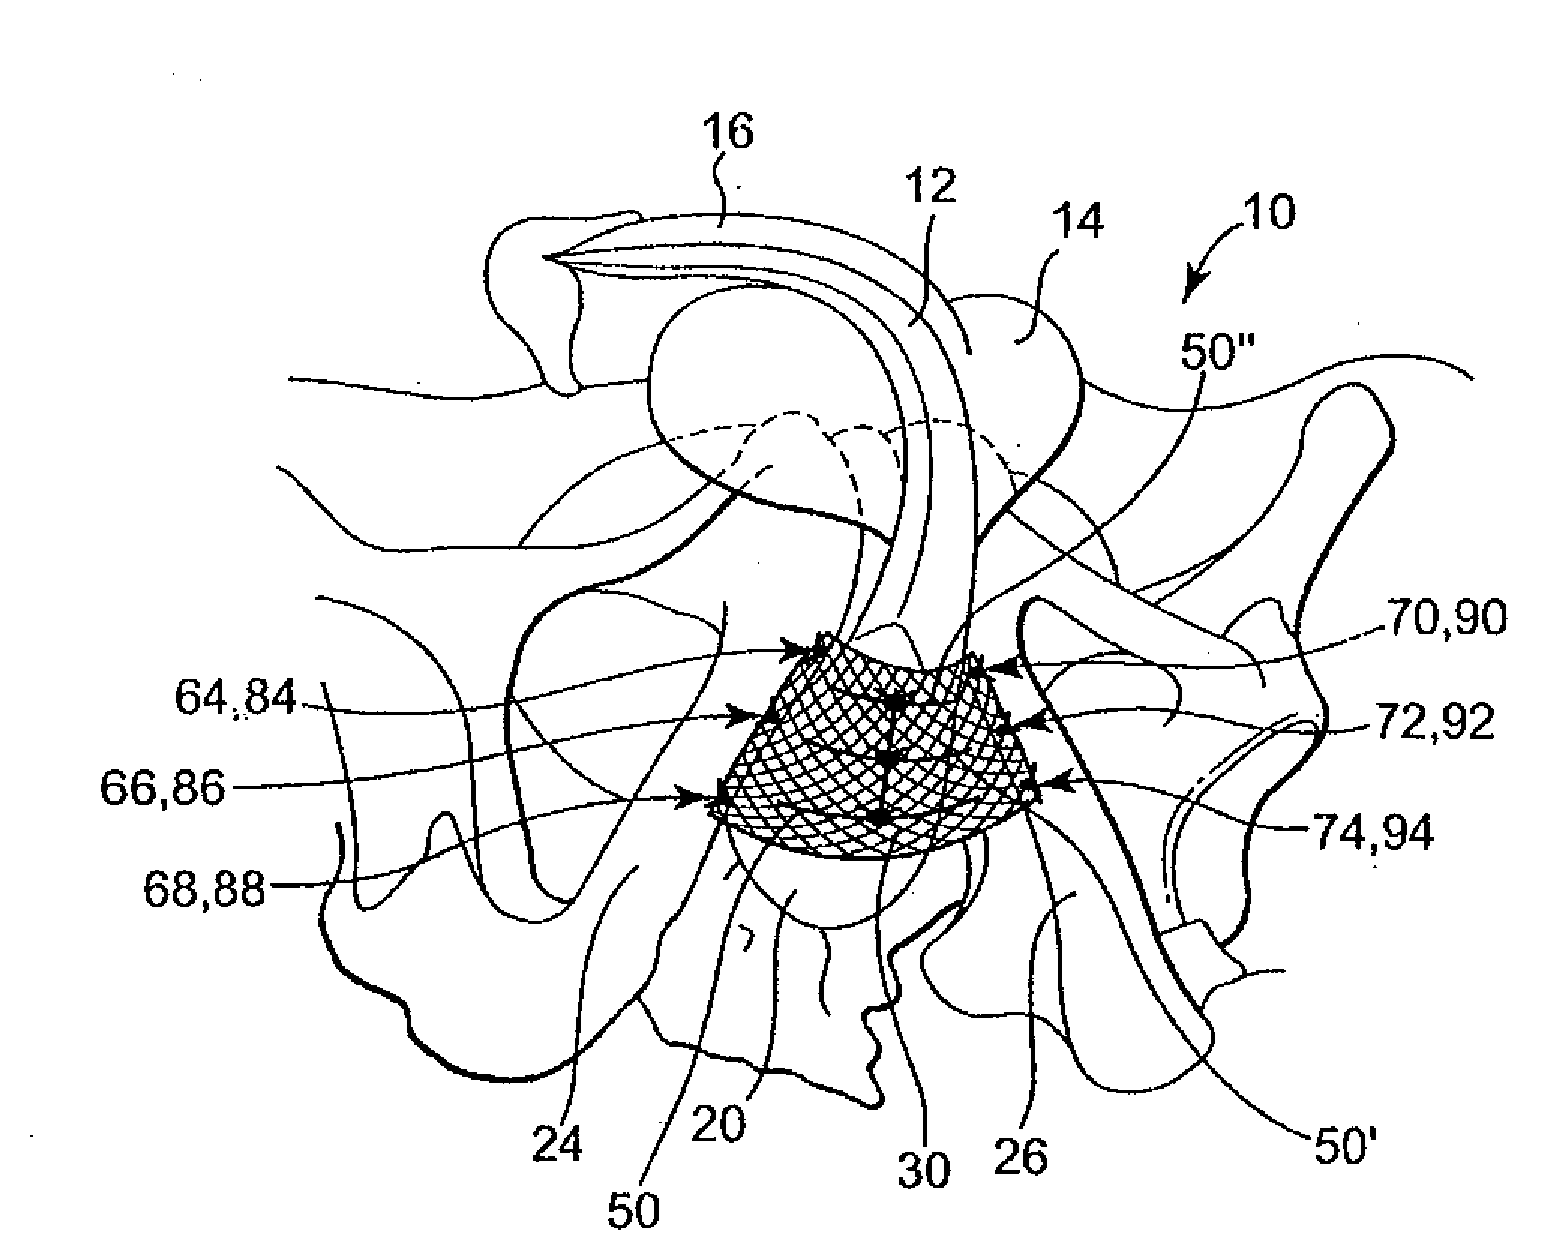 Methods and apparatus for securing and tensioning a urethral sling to pubic bone